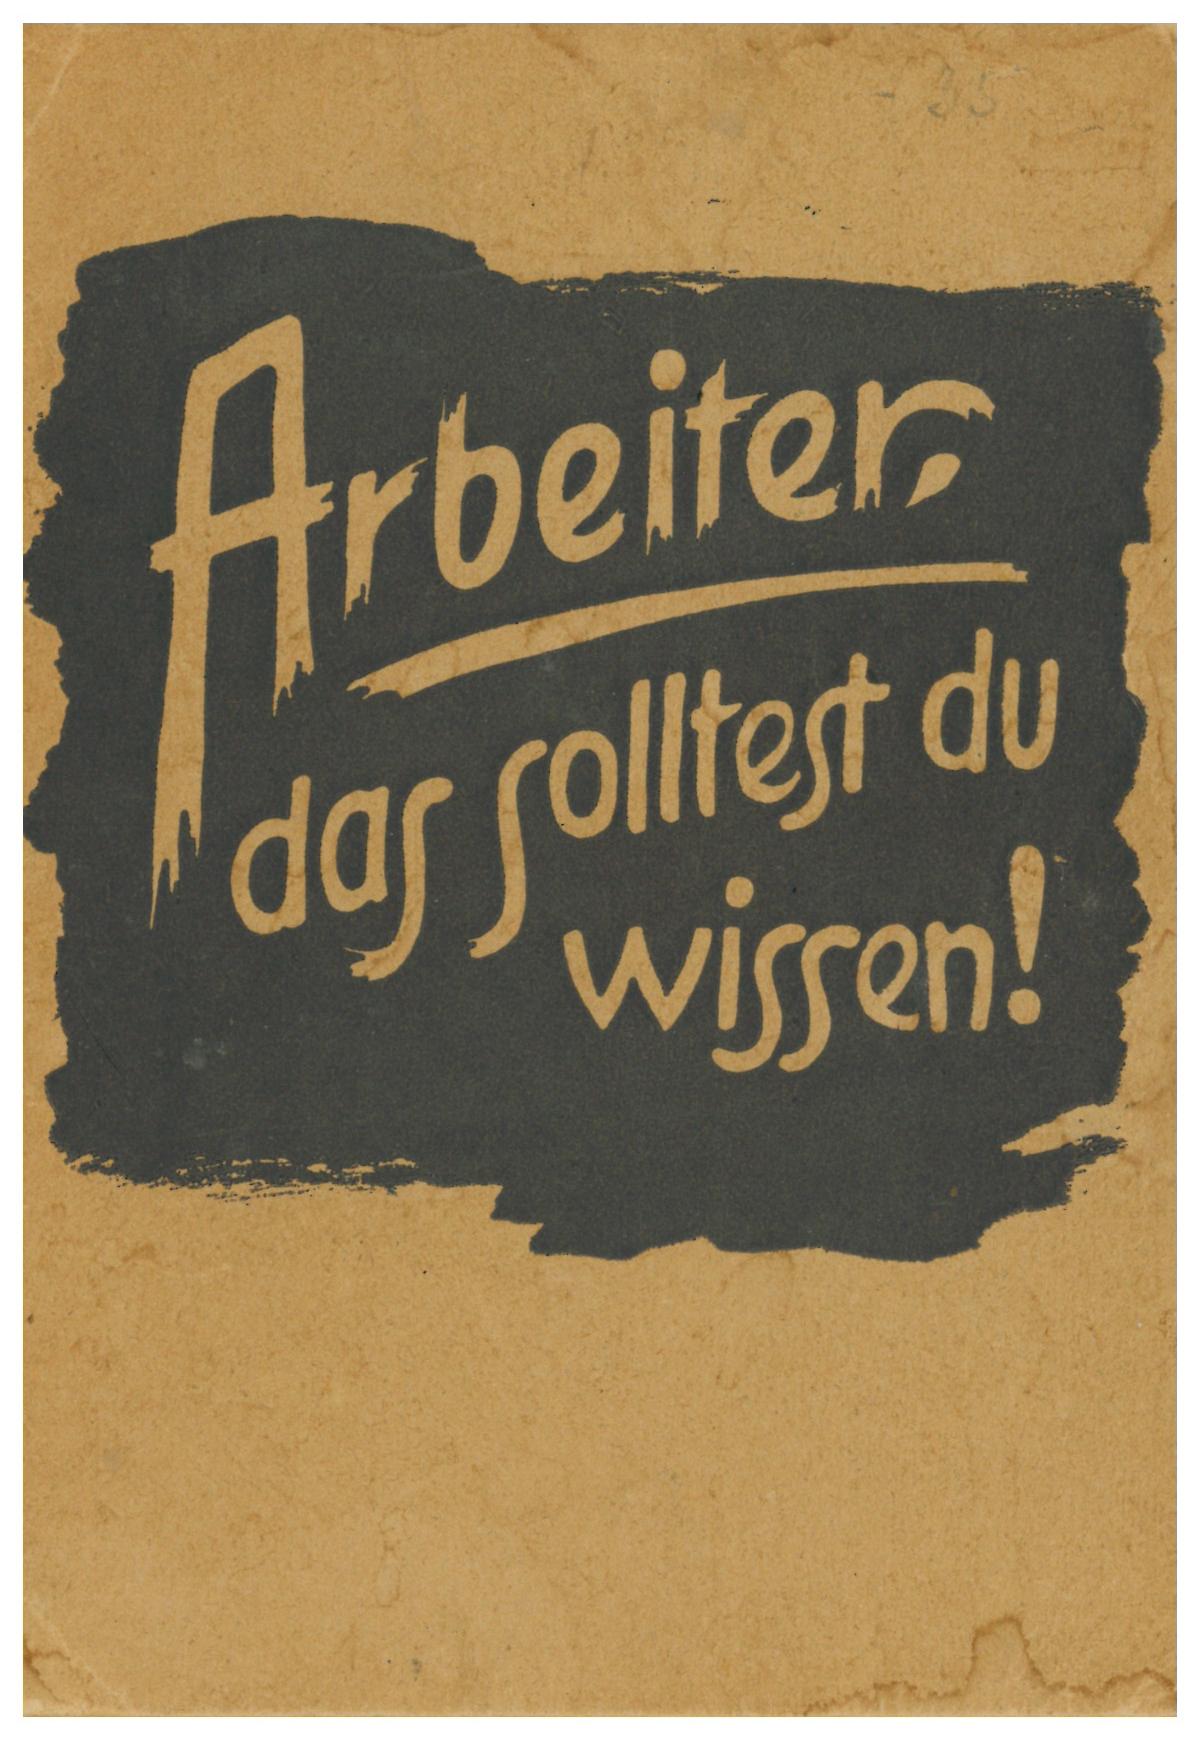 Cover of Nazi propaganda booklet for workers